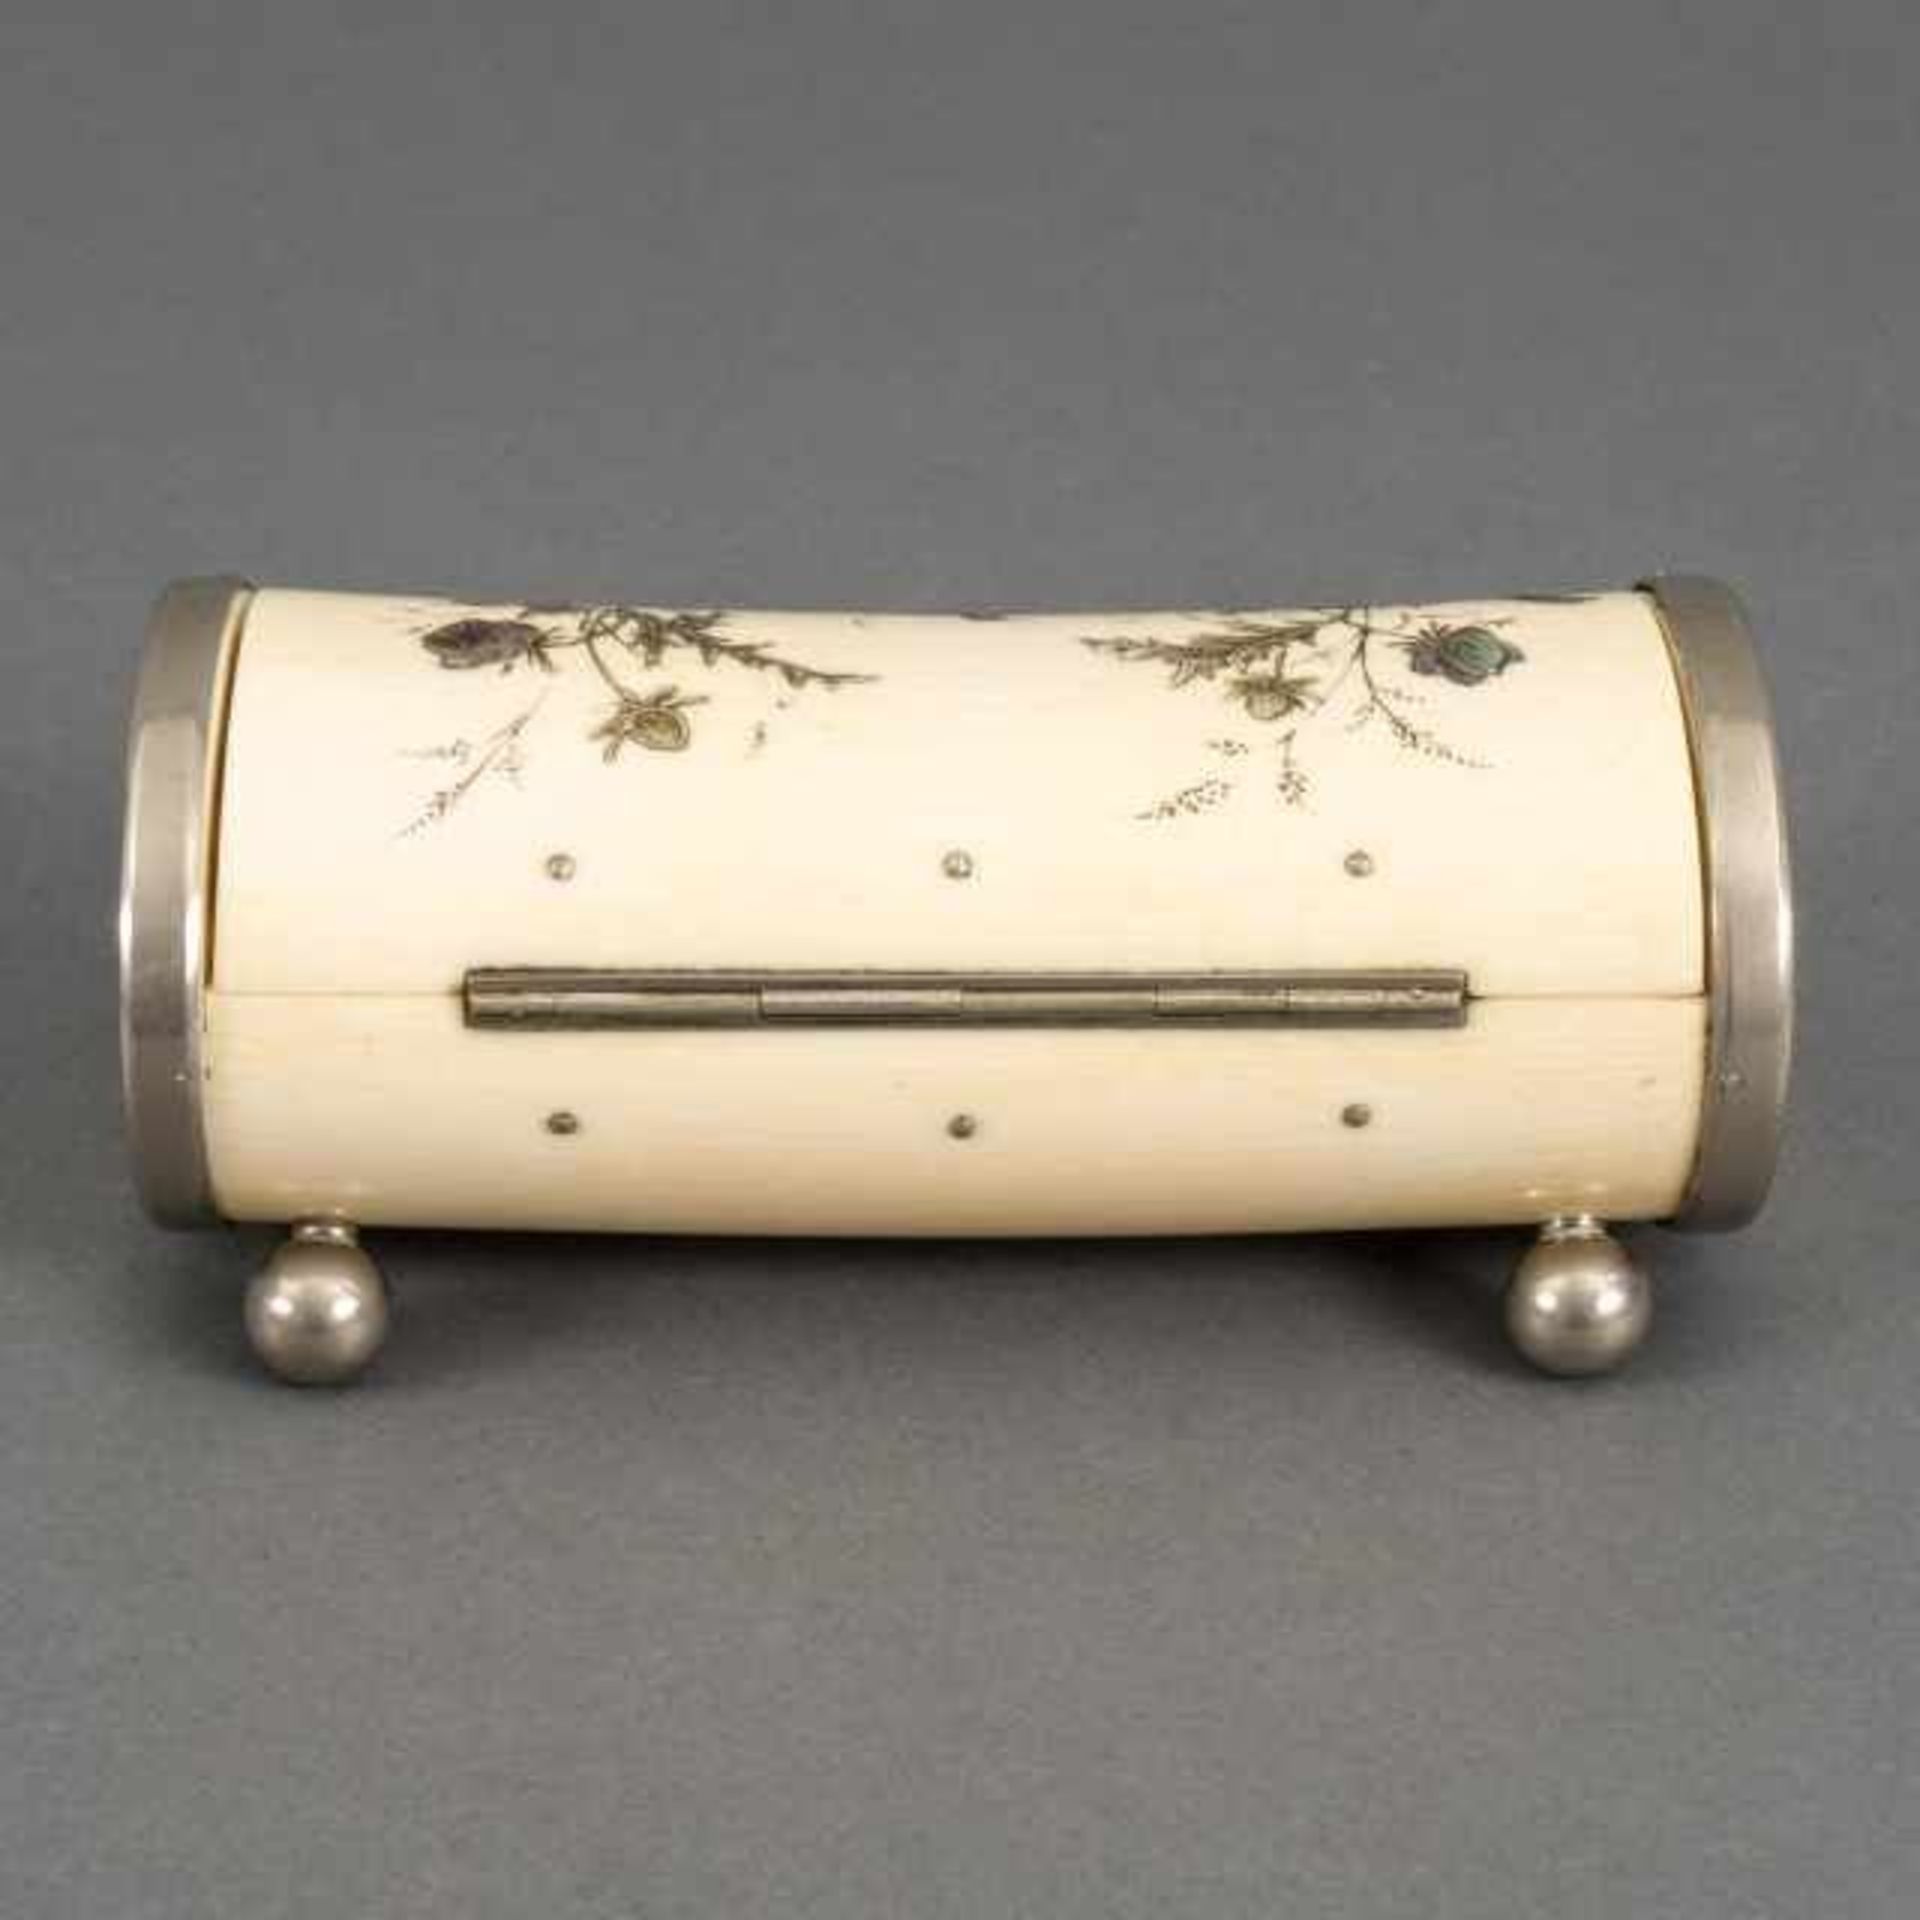 Ivory sewing kit container with nickel frames and Shibayama motif: ducks between flowers, inside a - Bild 4 aus 4